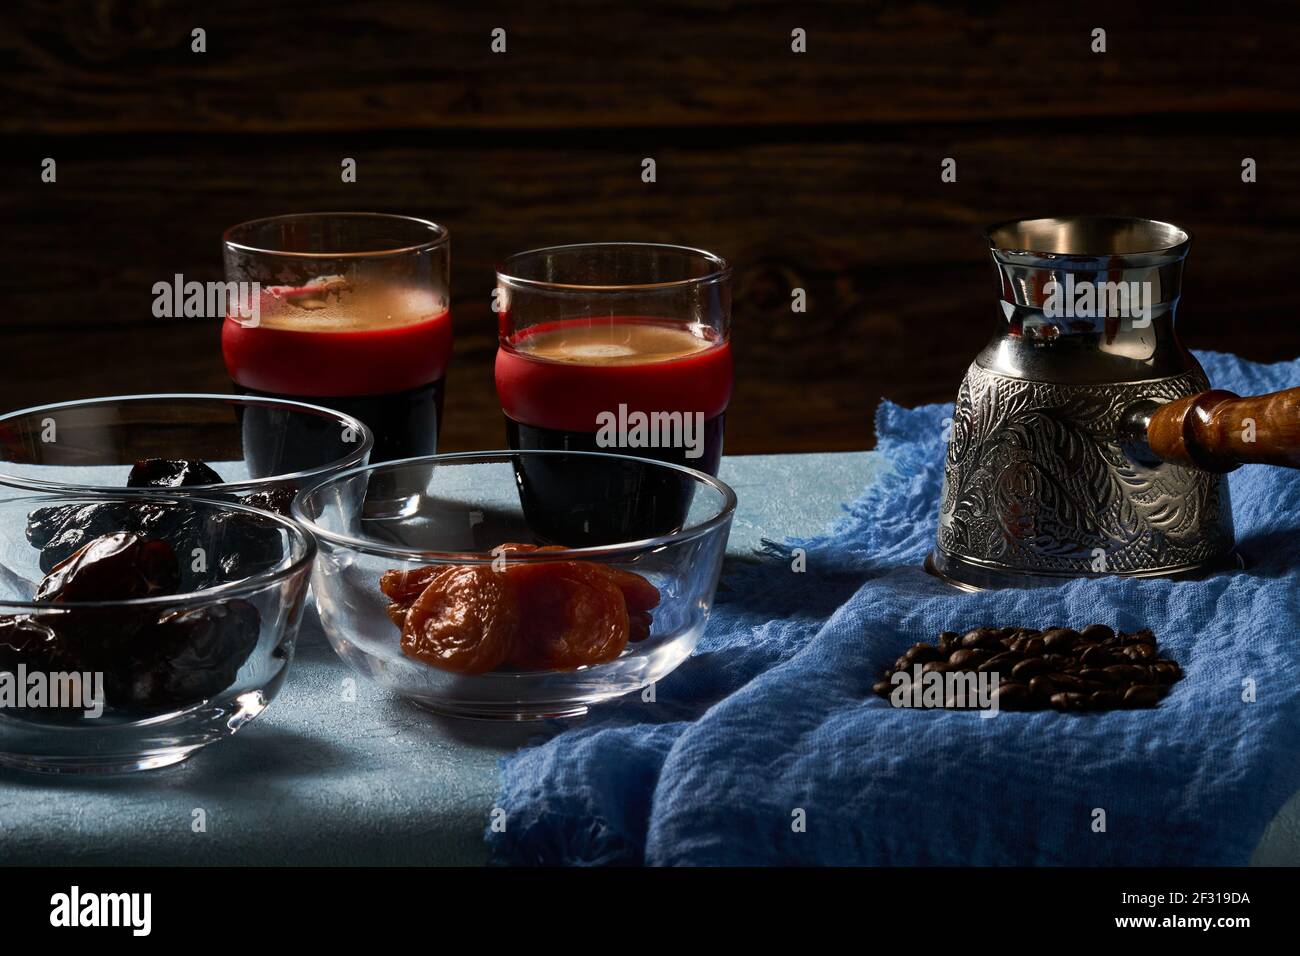 Coffee pot (Cezve), coffee beans, two glasses of coffee, dry apricot and dry plum. Stock Photo